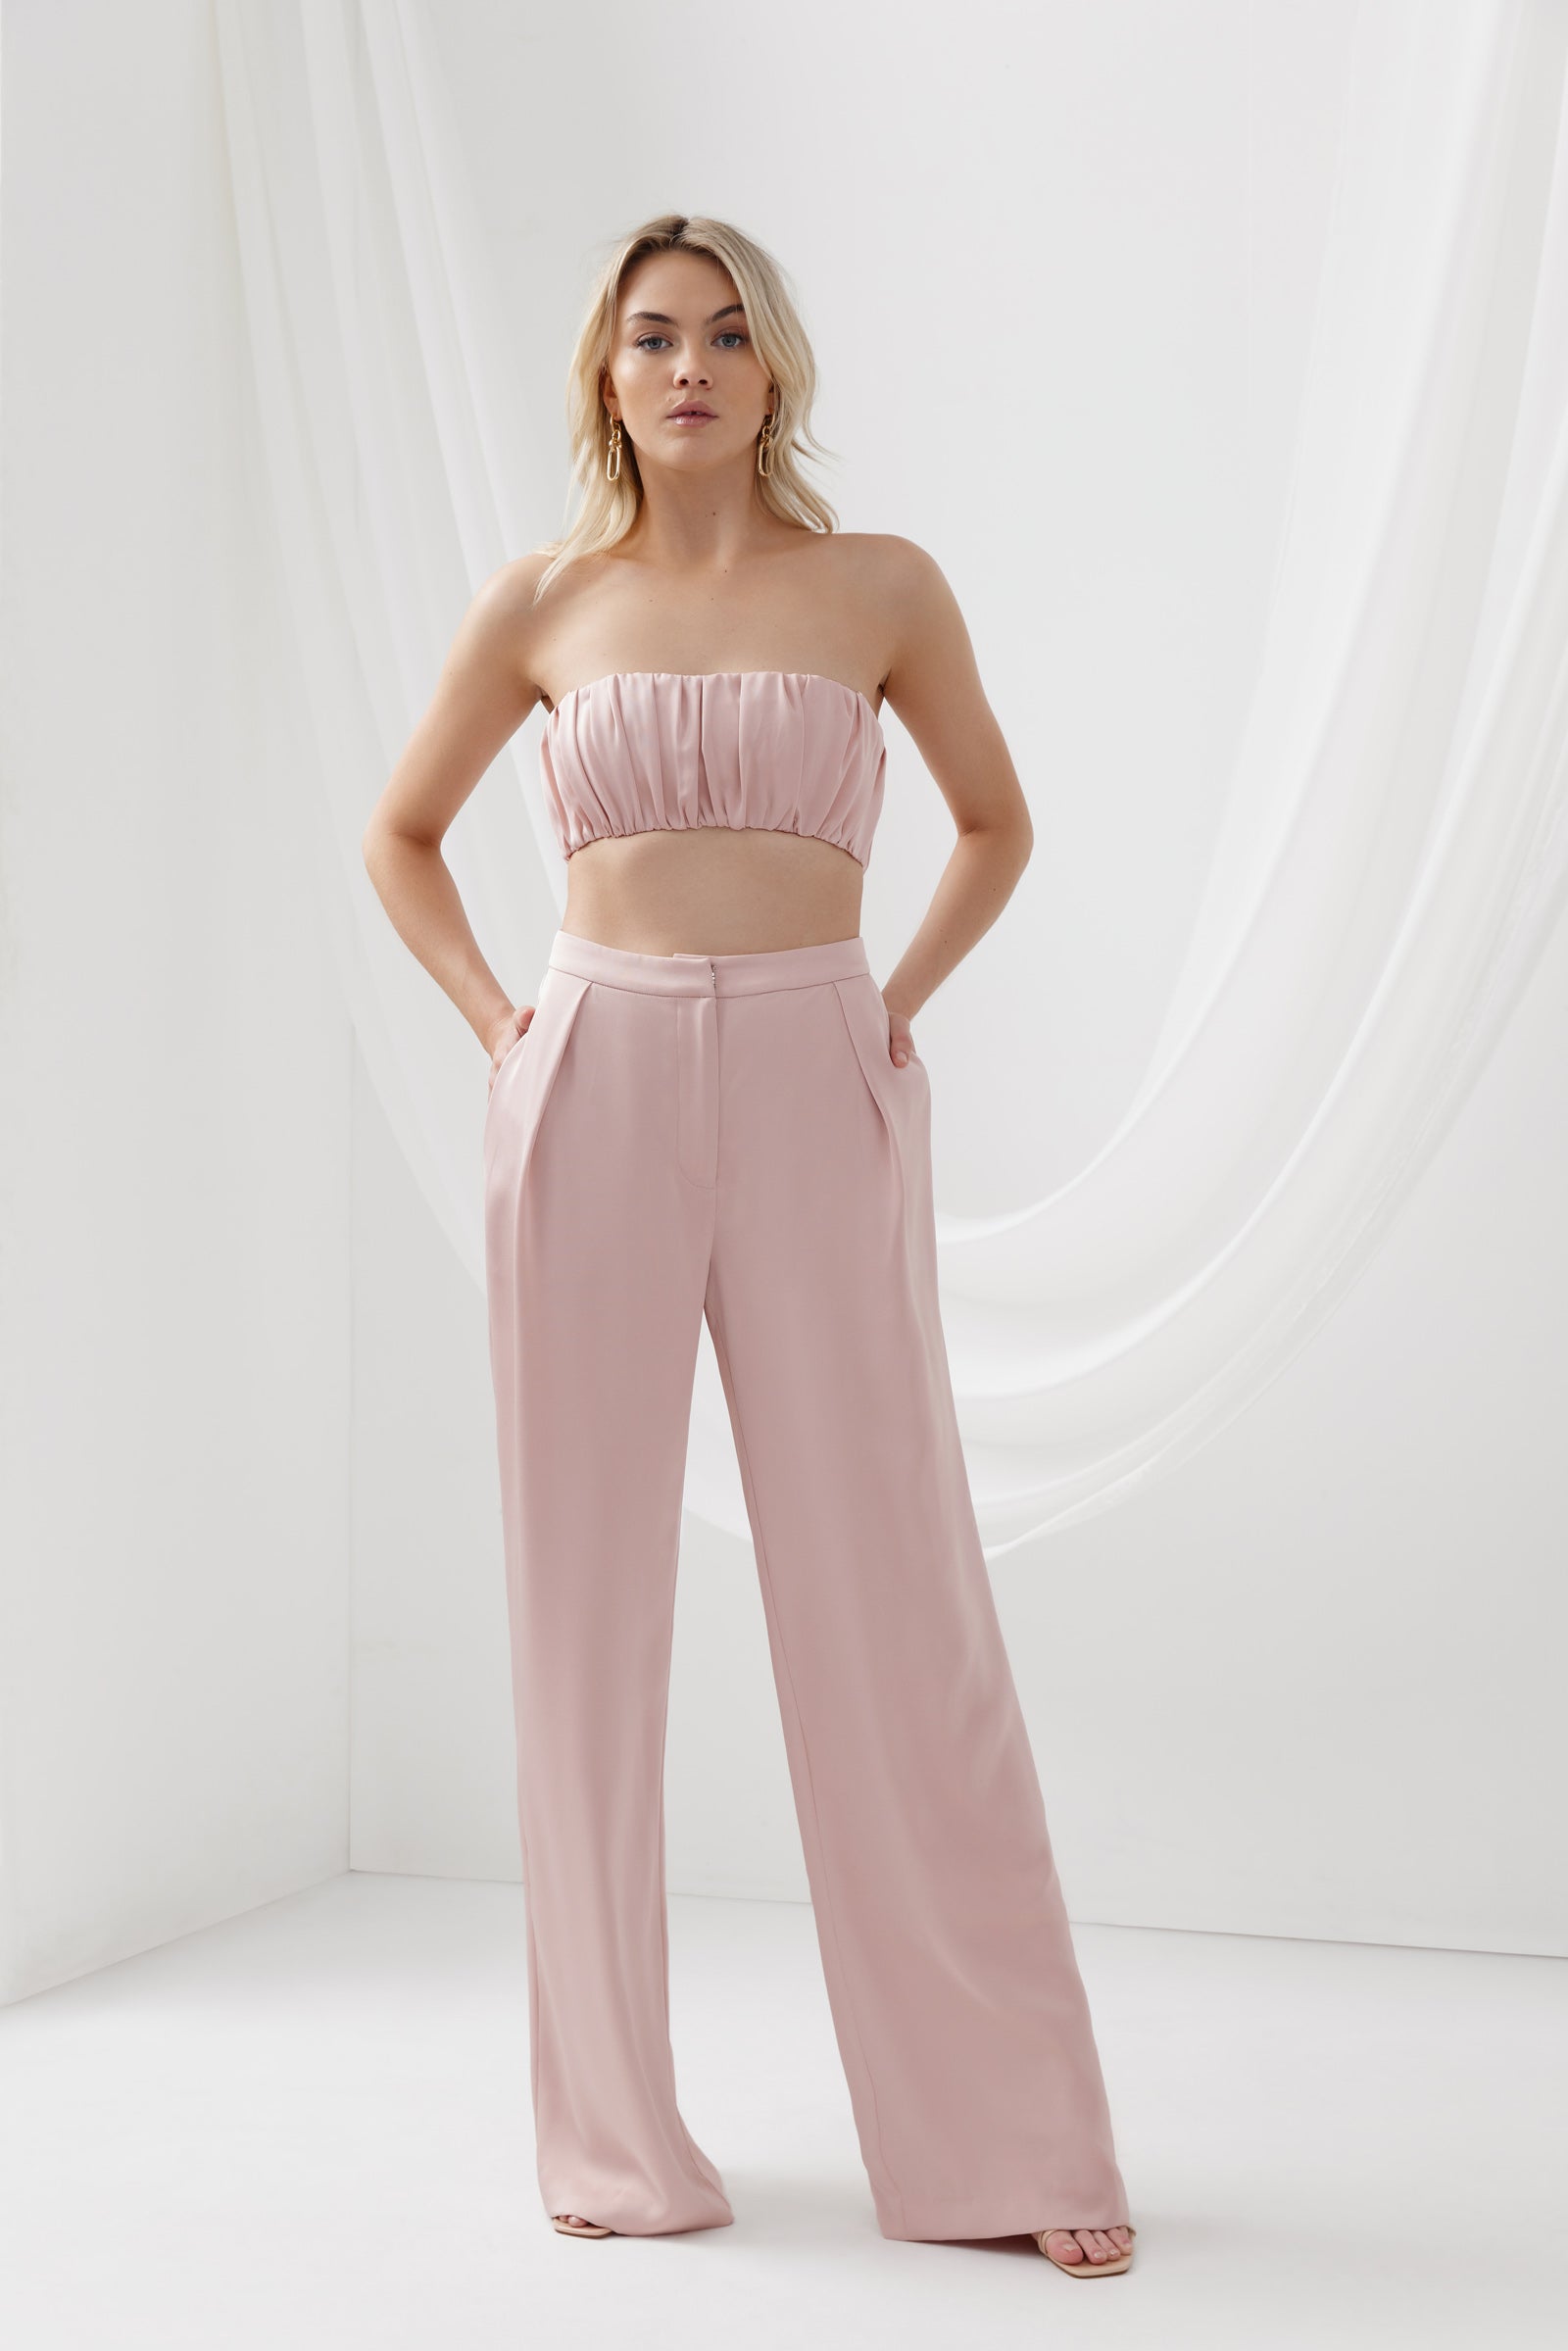 Lidia Top - Dusty Pink